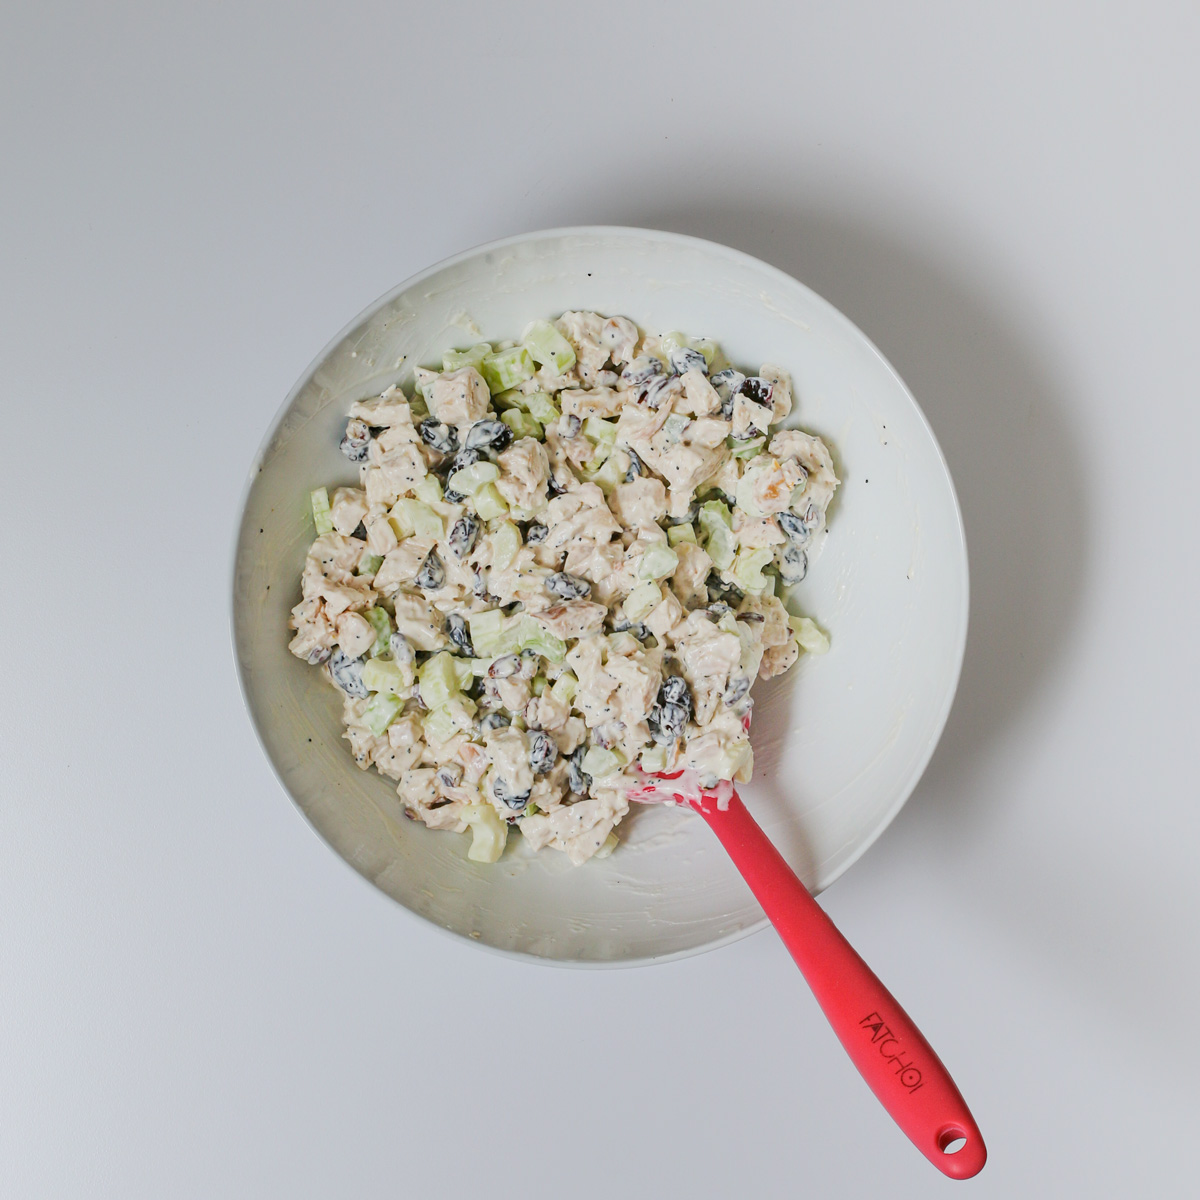 chicken salad completed in white bowl with red spatula.